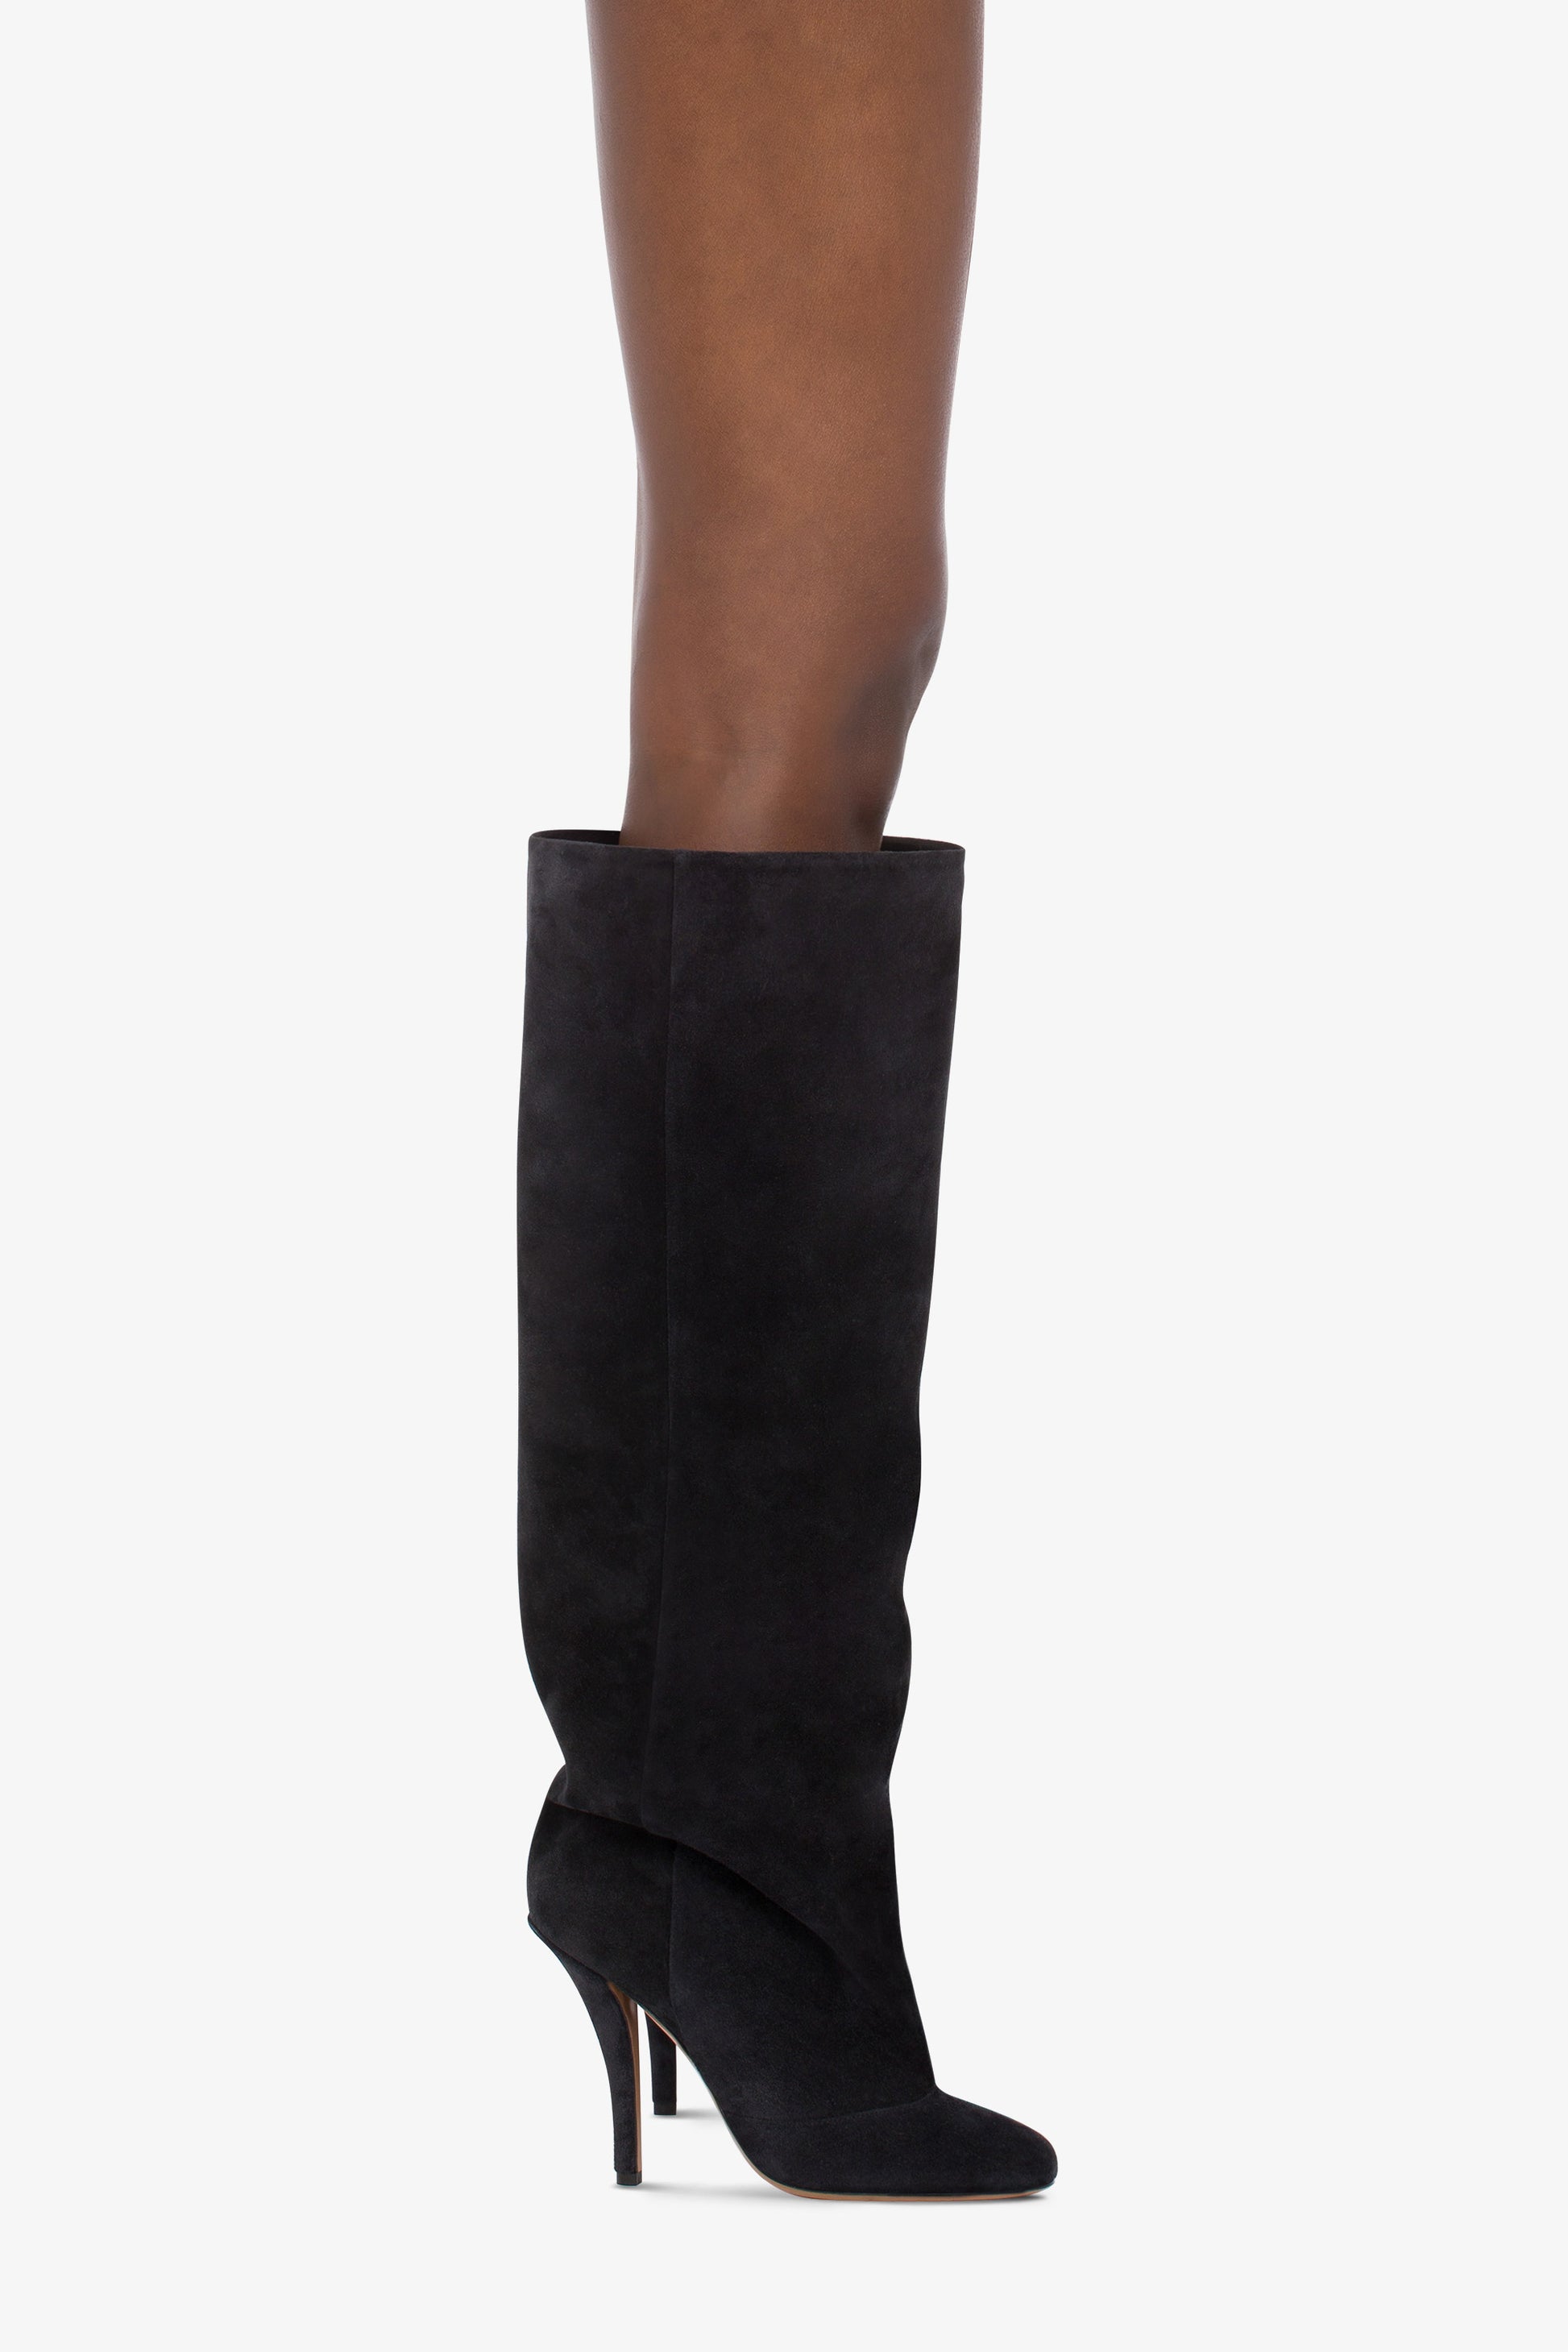 Knee-high boots in soft off-black suede leather - Product worn